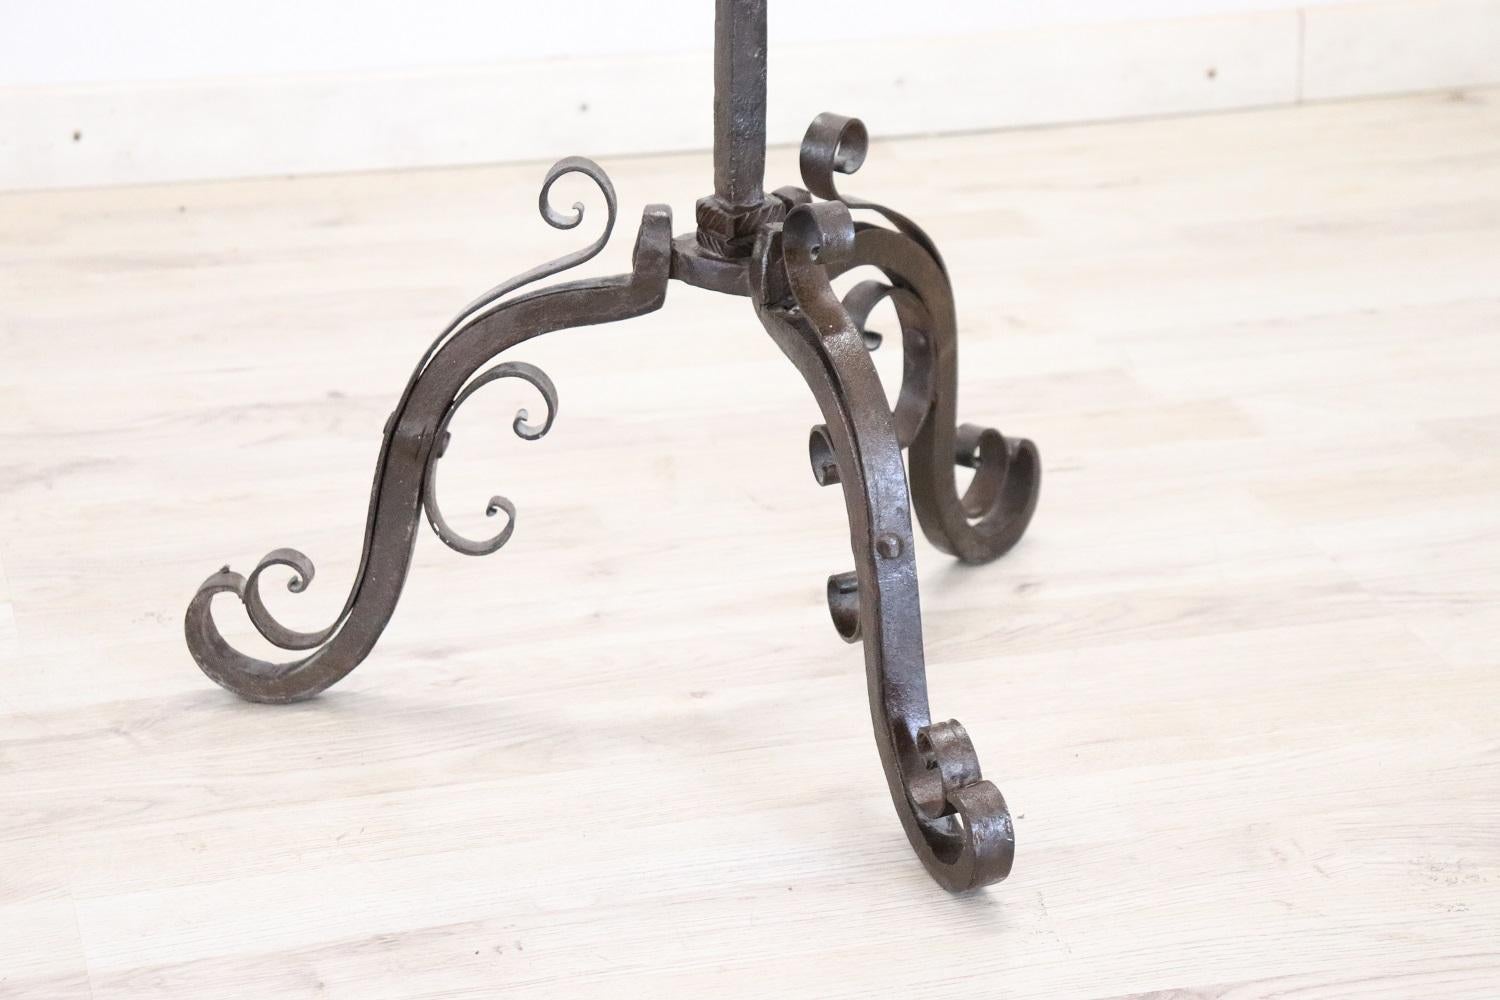 Rare candelabra in forged iron with 1 arm. The iron has acquired a beautiful old patina. Can use it as a lamp.